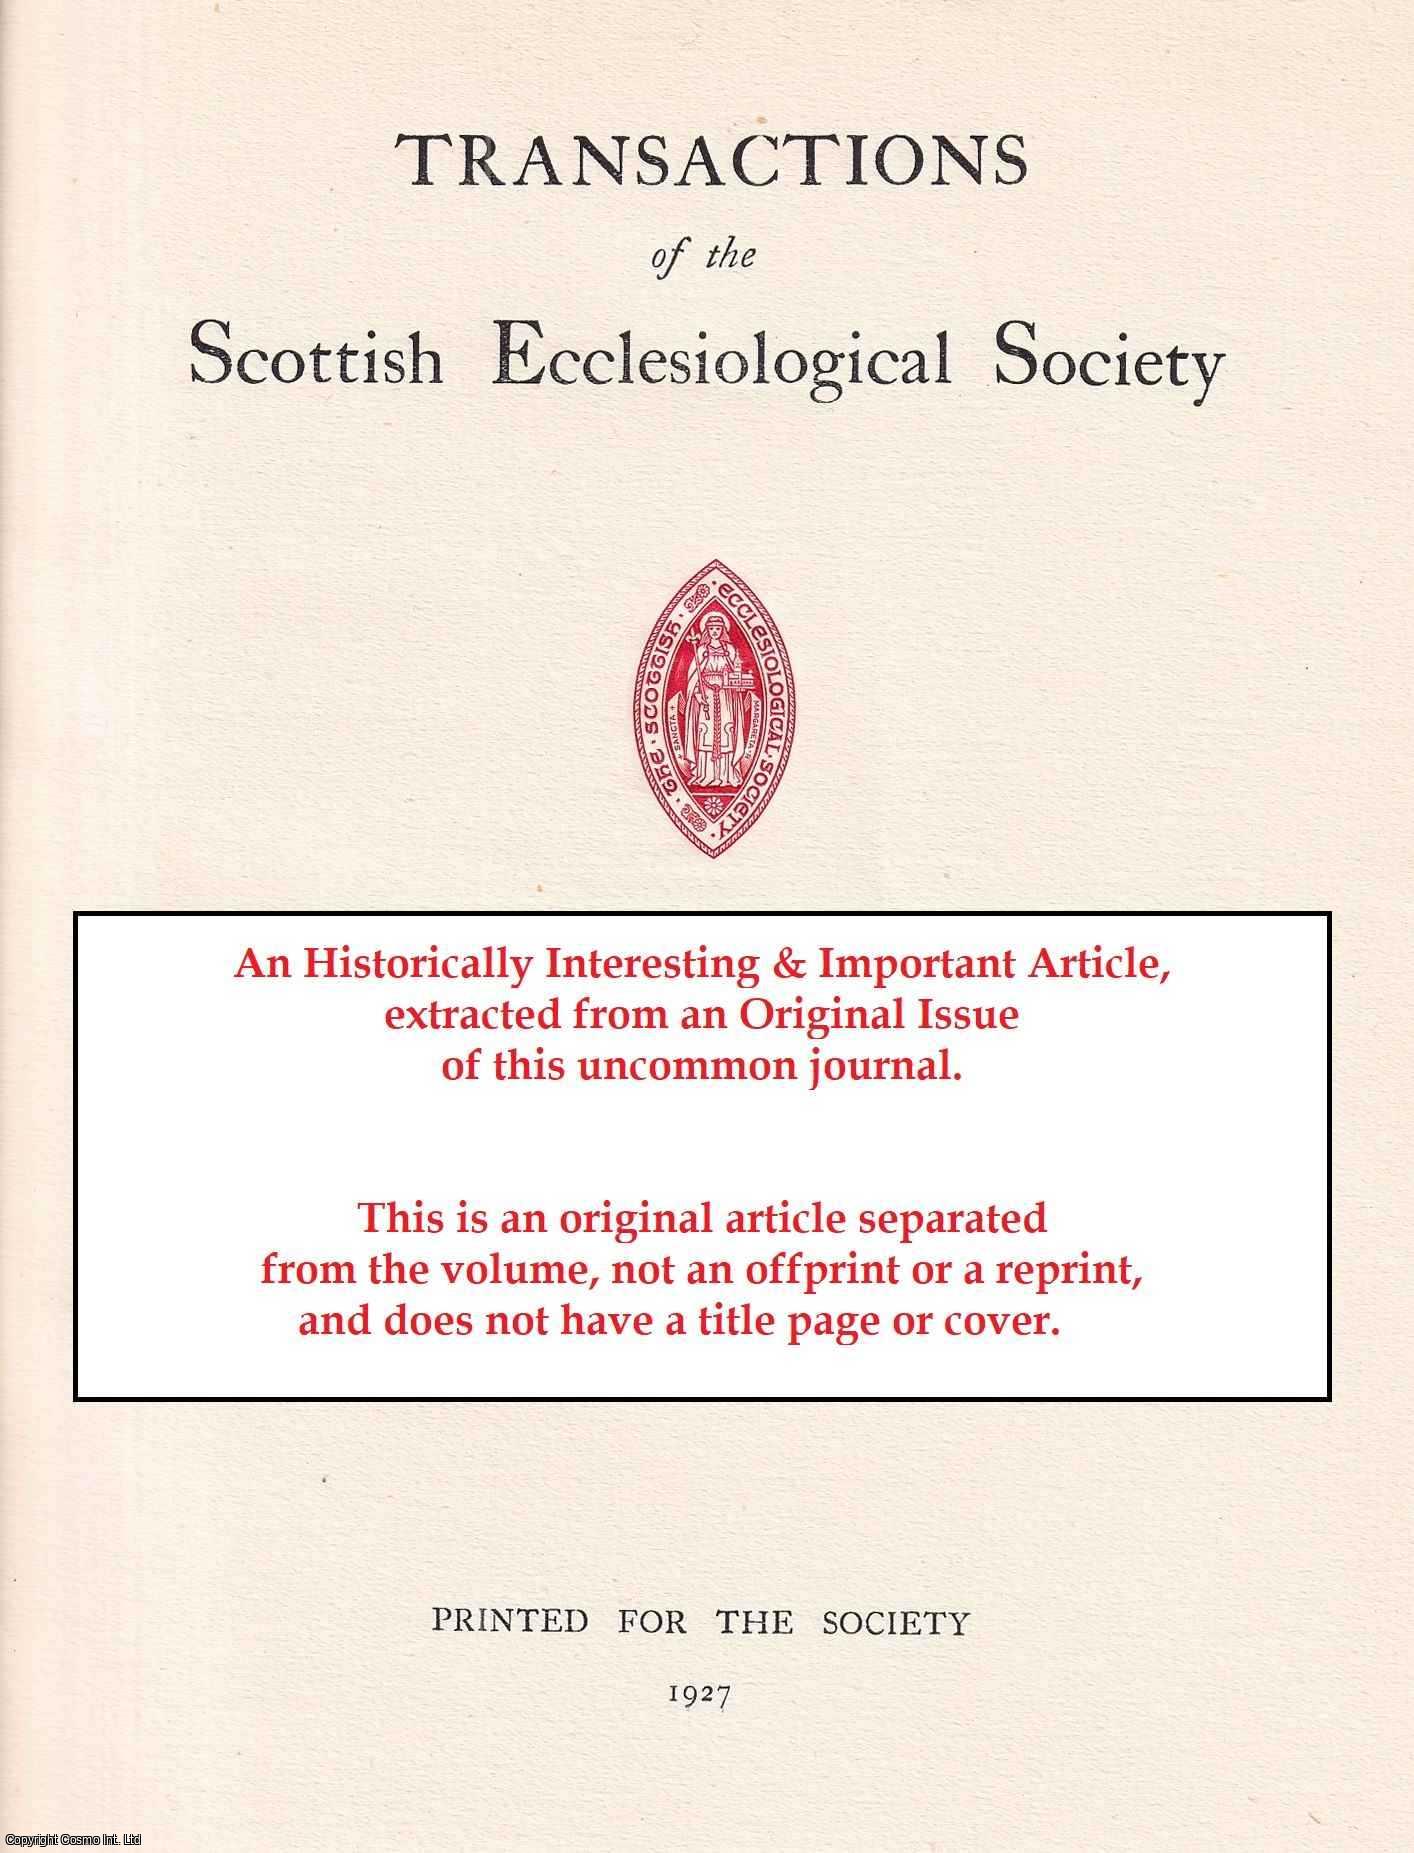 Rev James Cooper - St. Gerardine; a Chapter in the Ecclesiastical History of Moray. An original article from the Transactions of the Aberdeen Ecclesiological Society, 1895.